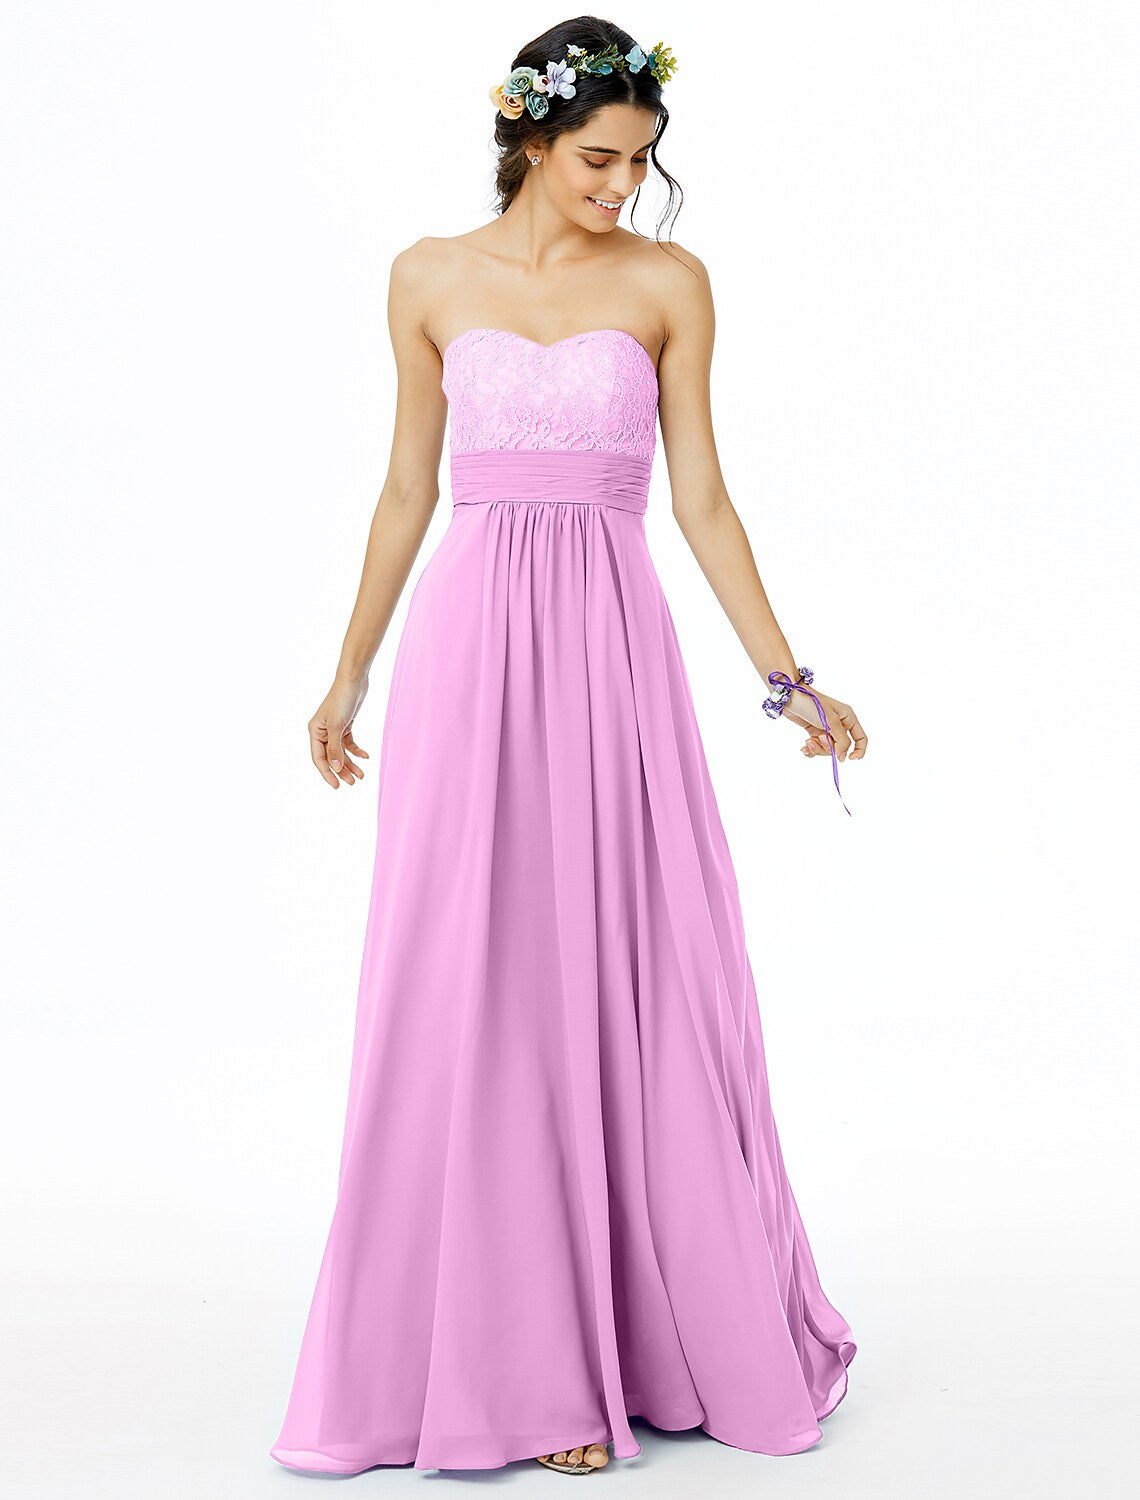 A-Line Bridesmaid Dress Sweetheart Neckline Sleeveless Open Back Floor Length Chiffon / Lace with Lace / Sash / Ribbon / Ruched